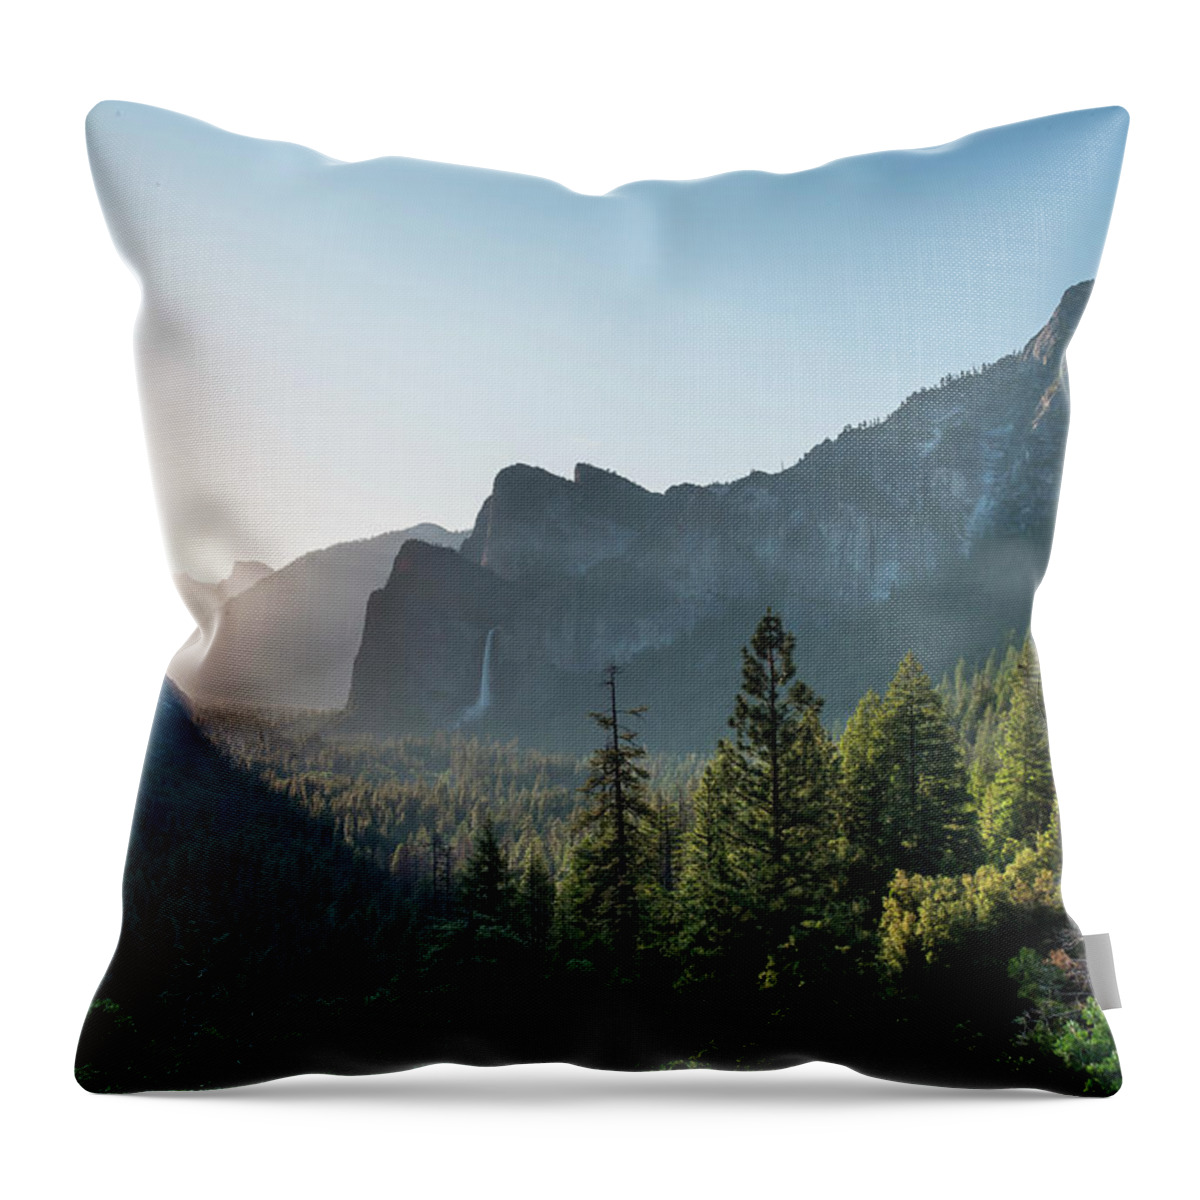 Yosemite Throw Pillow featuring the photograph Morning Light In Yosemite by Bill Roberts